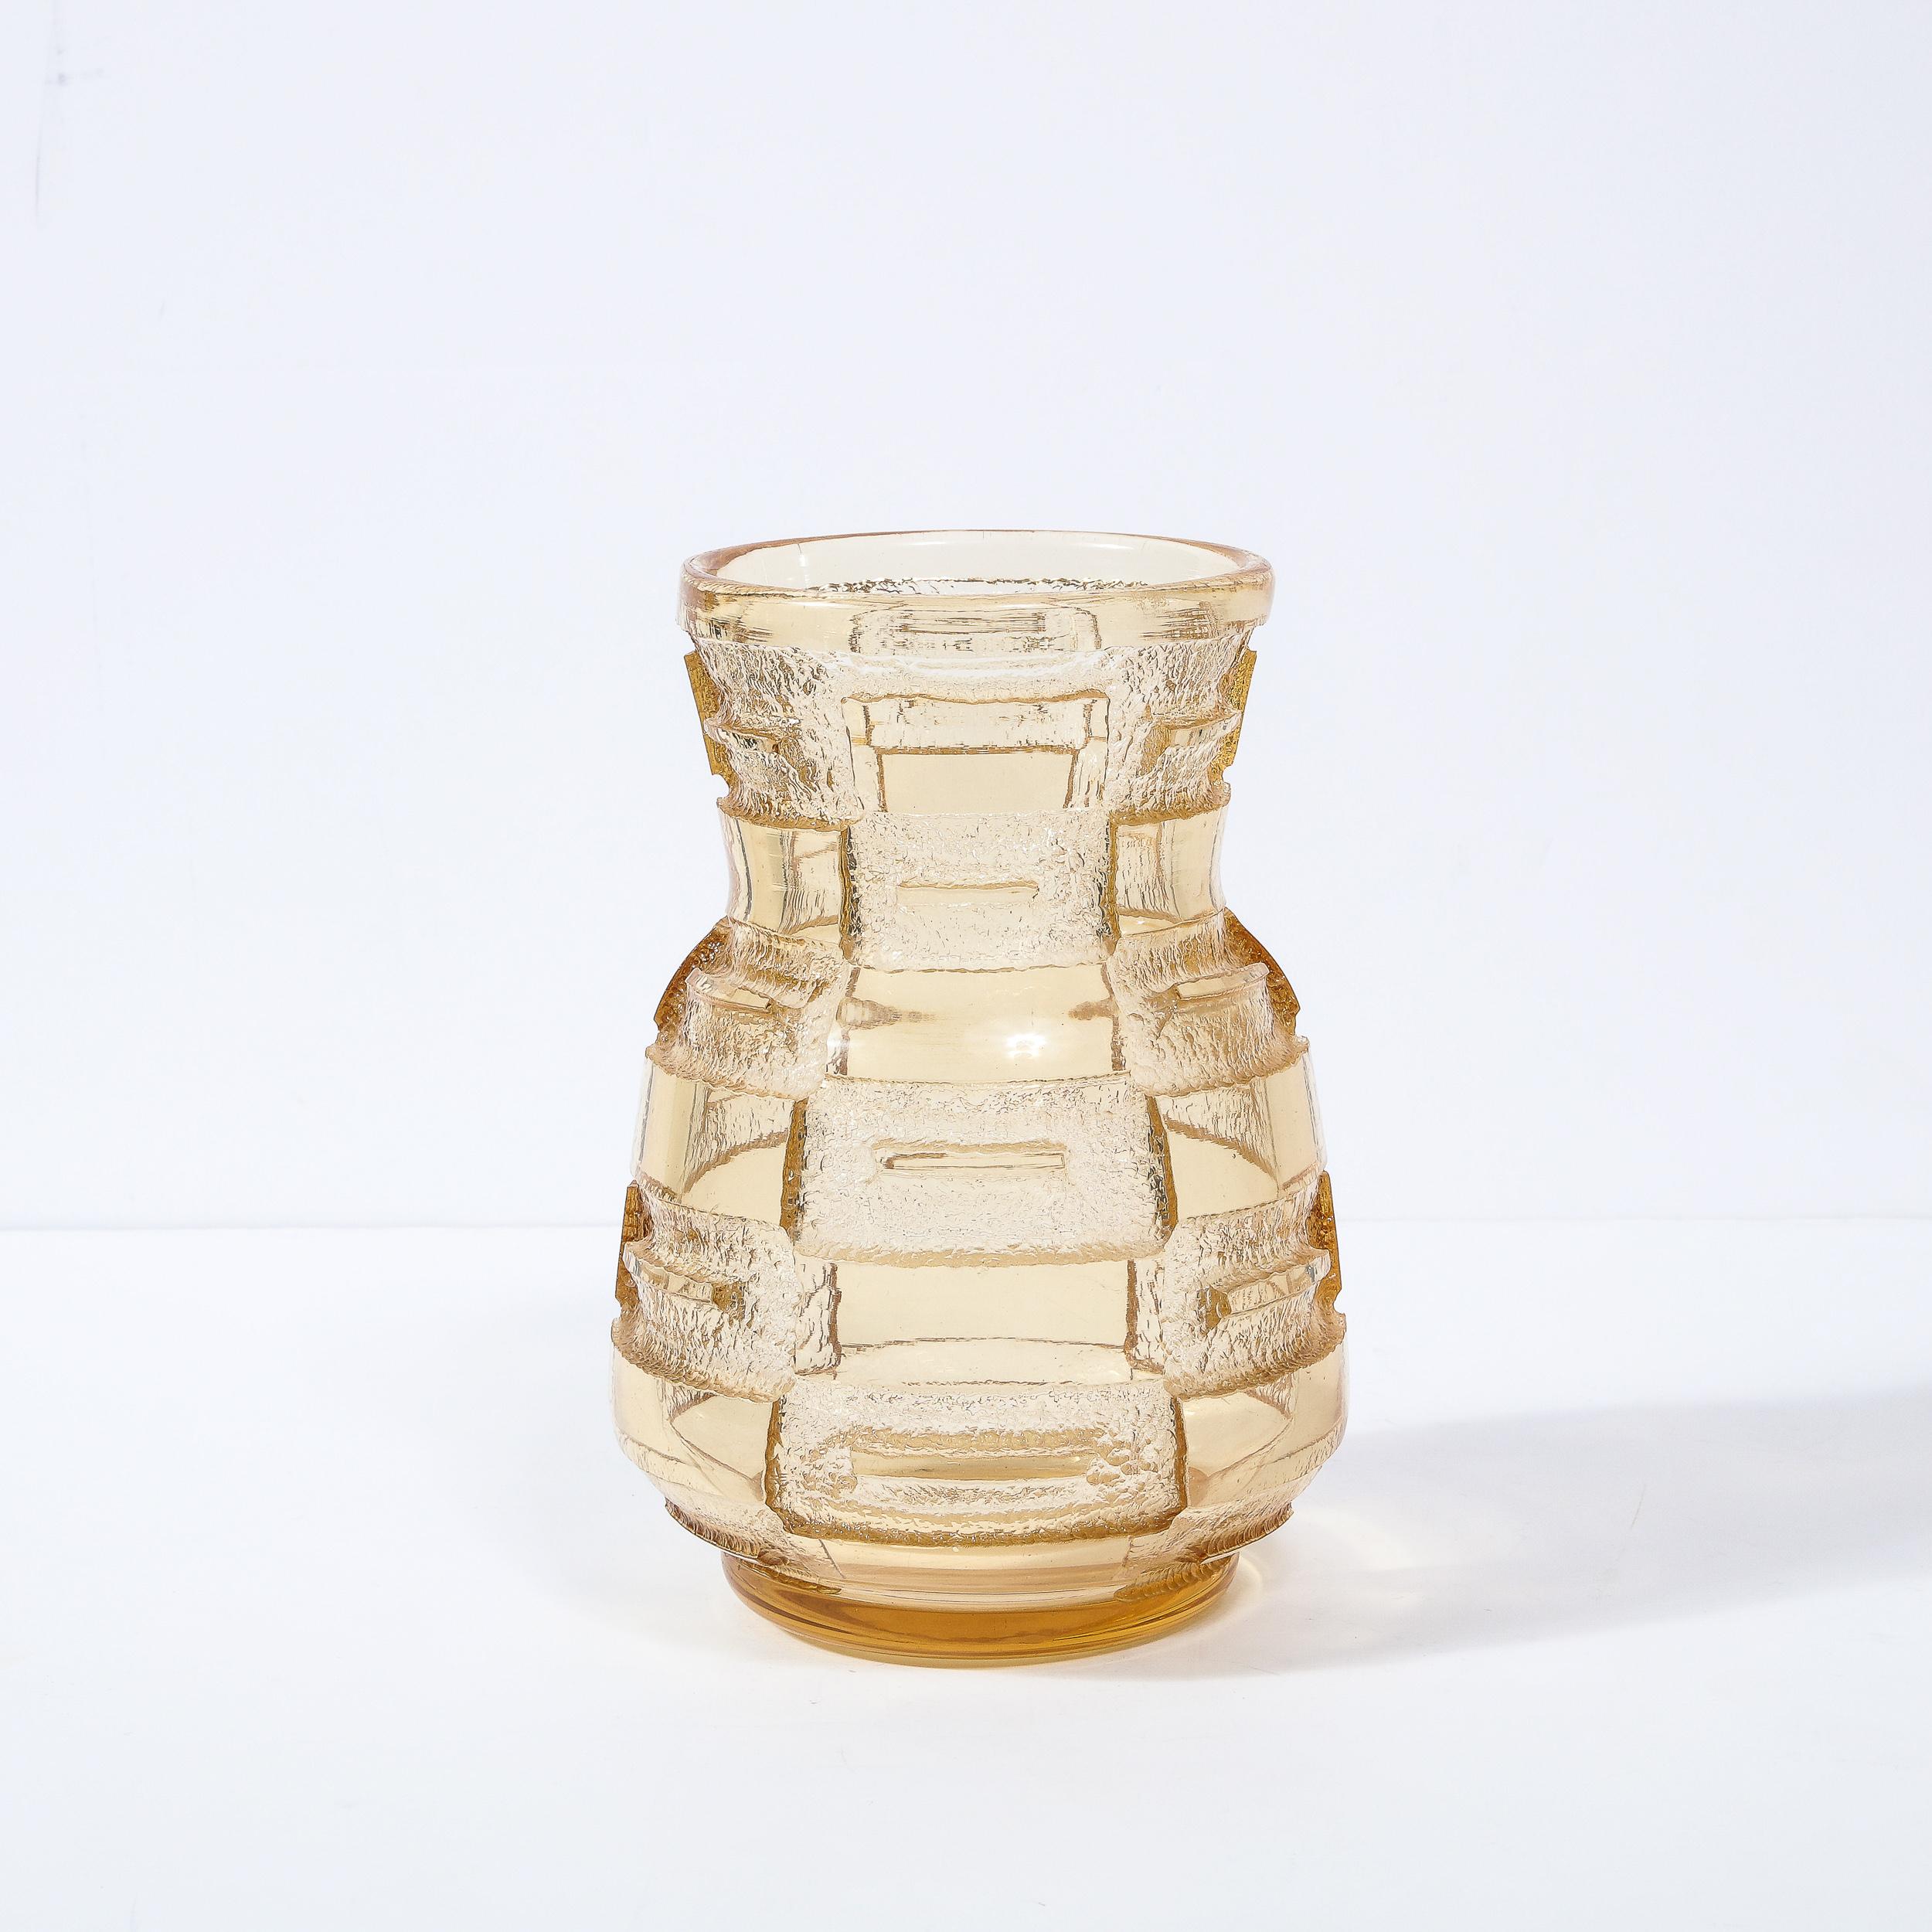 This elegant and sophisticated Art Deco vase/ vessel was realized in Nancy, France by the esteemed studio of Daum- arguably the most prestigious and highly collected atelier of the period circa 1930. The piece features a round base that dramatically